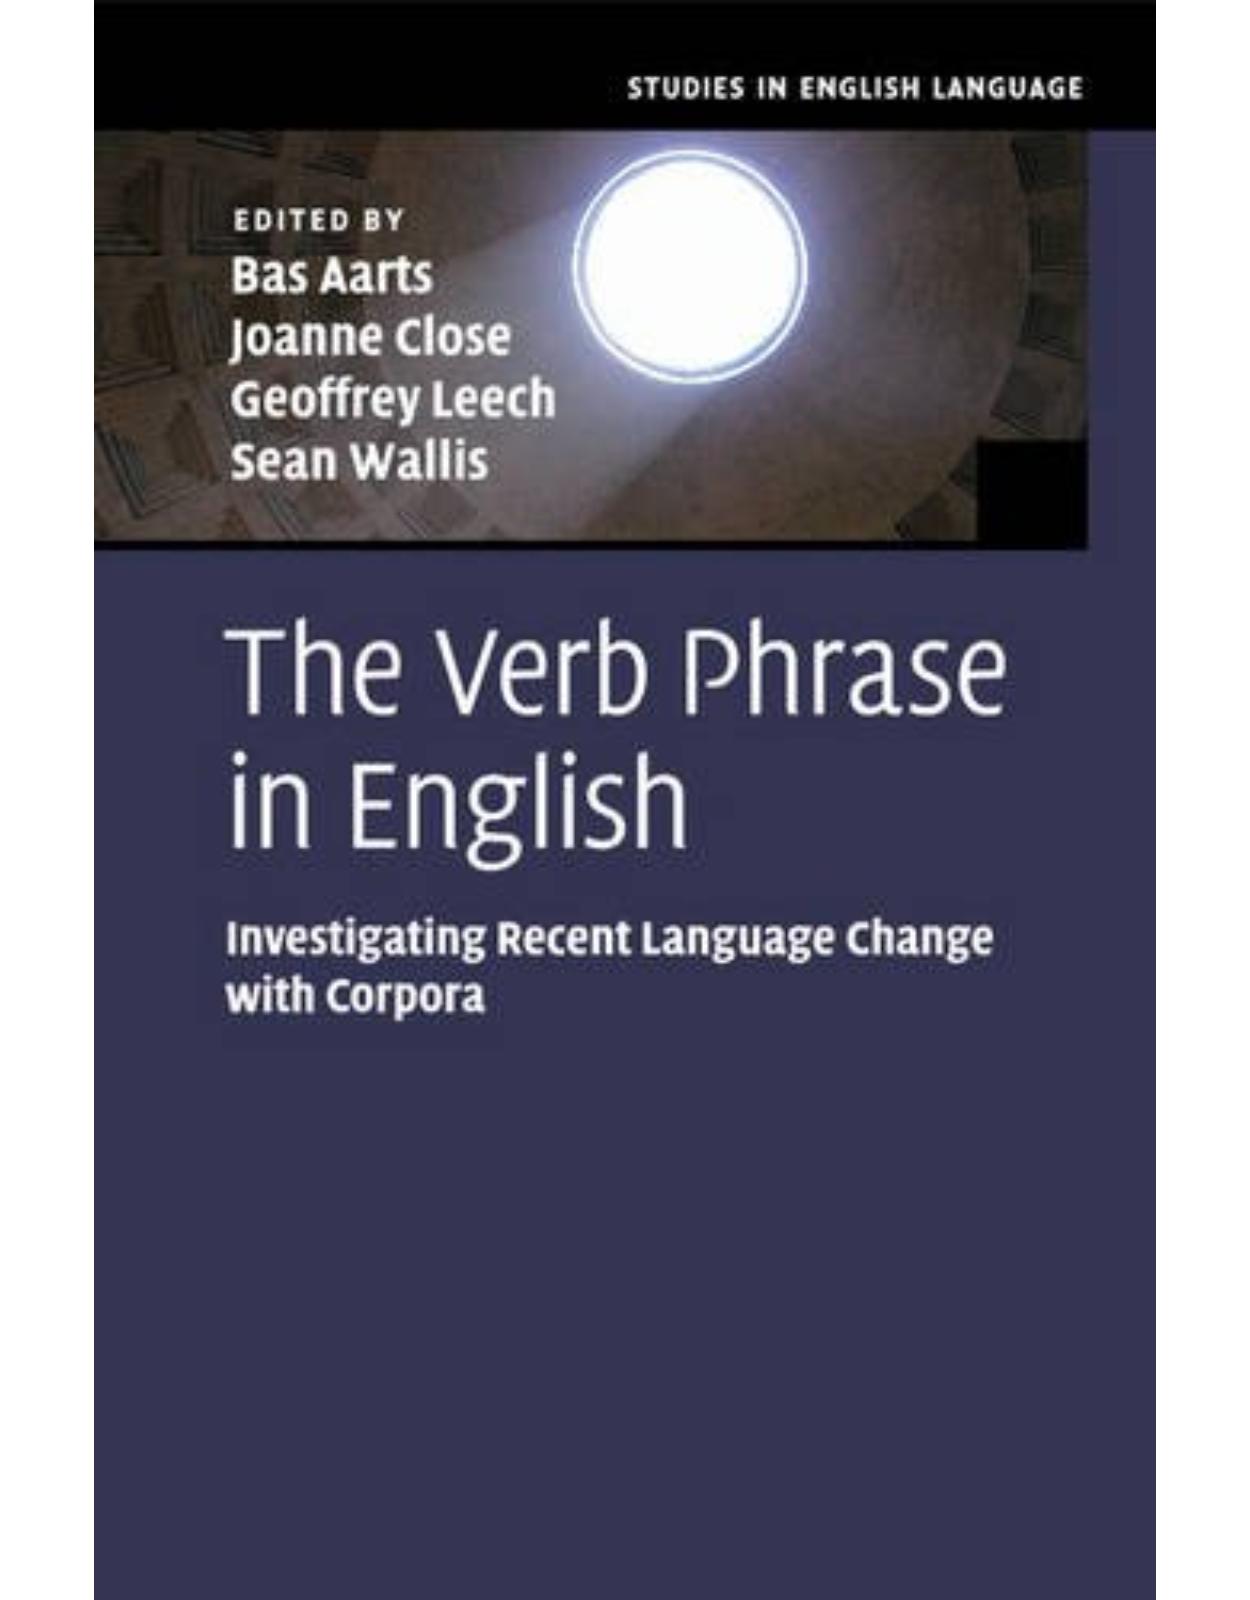 The Verb Phrase in English: Investigating Recent Language Change with Corpora (Studies in English Language) 